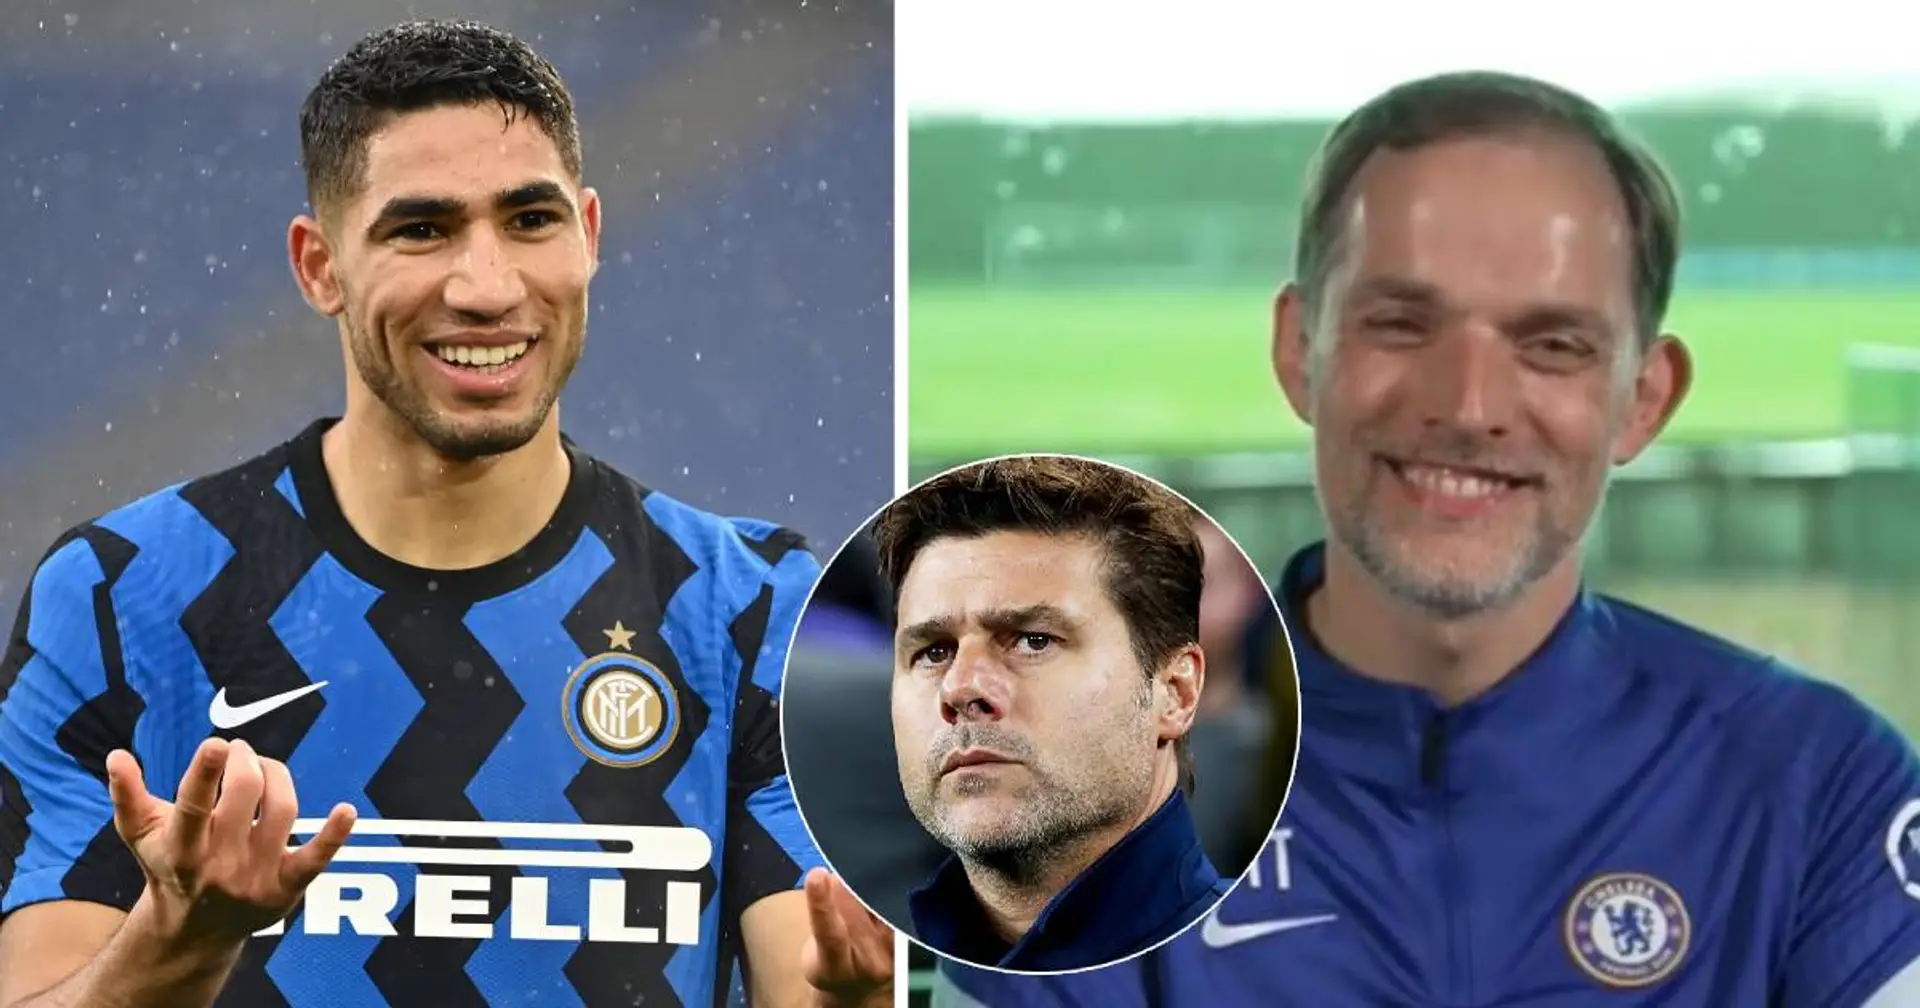 'He would choose Chelsea over PSG': Transfer insider details why Blues have great chance of signing Hakimi (reliability: 4 stars)